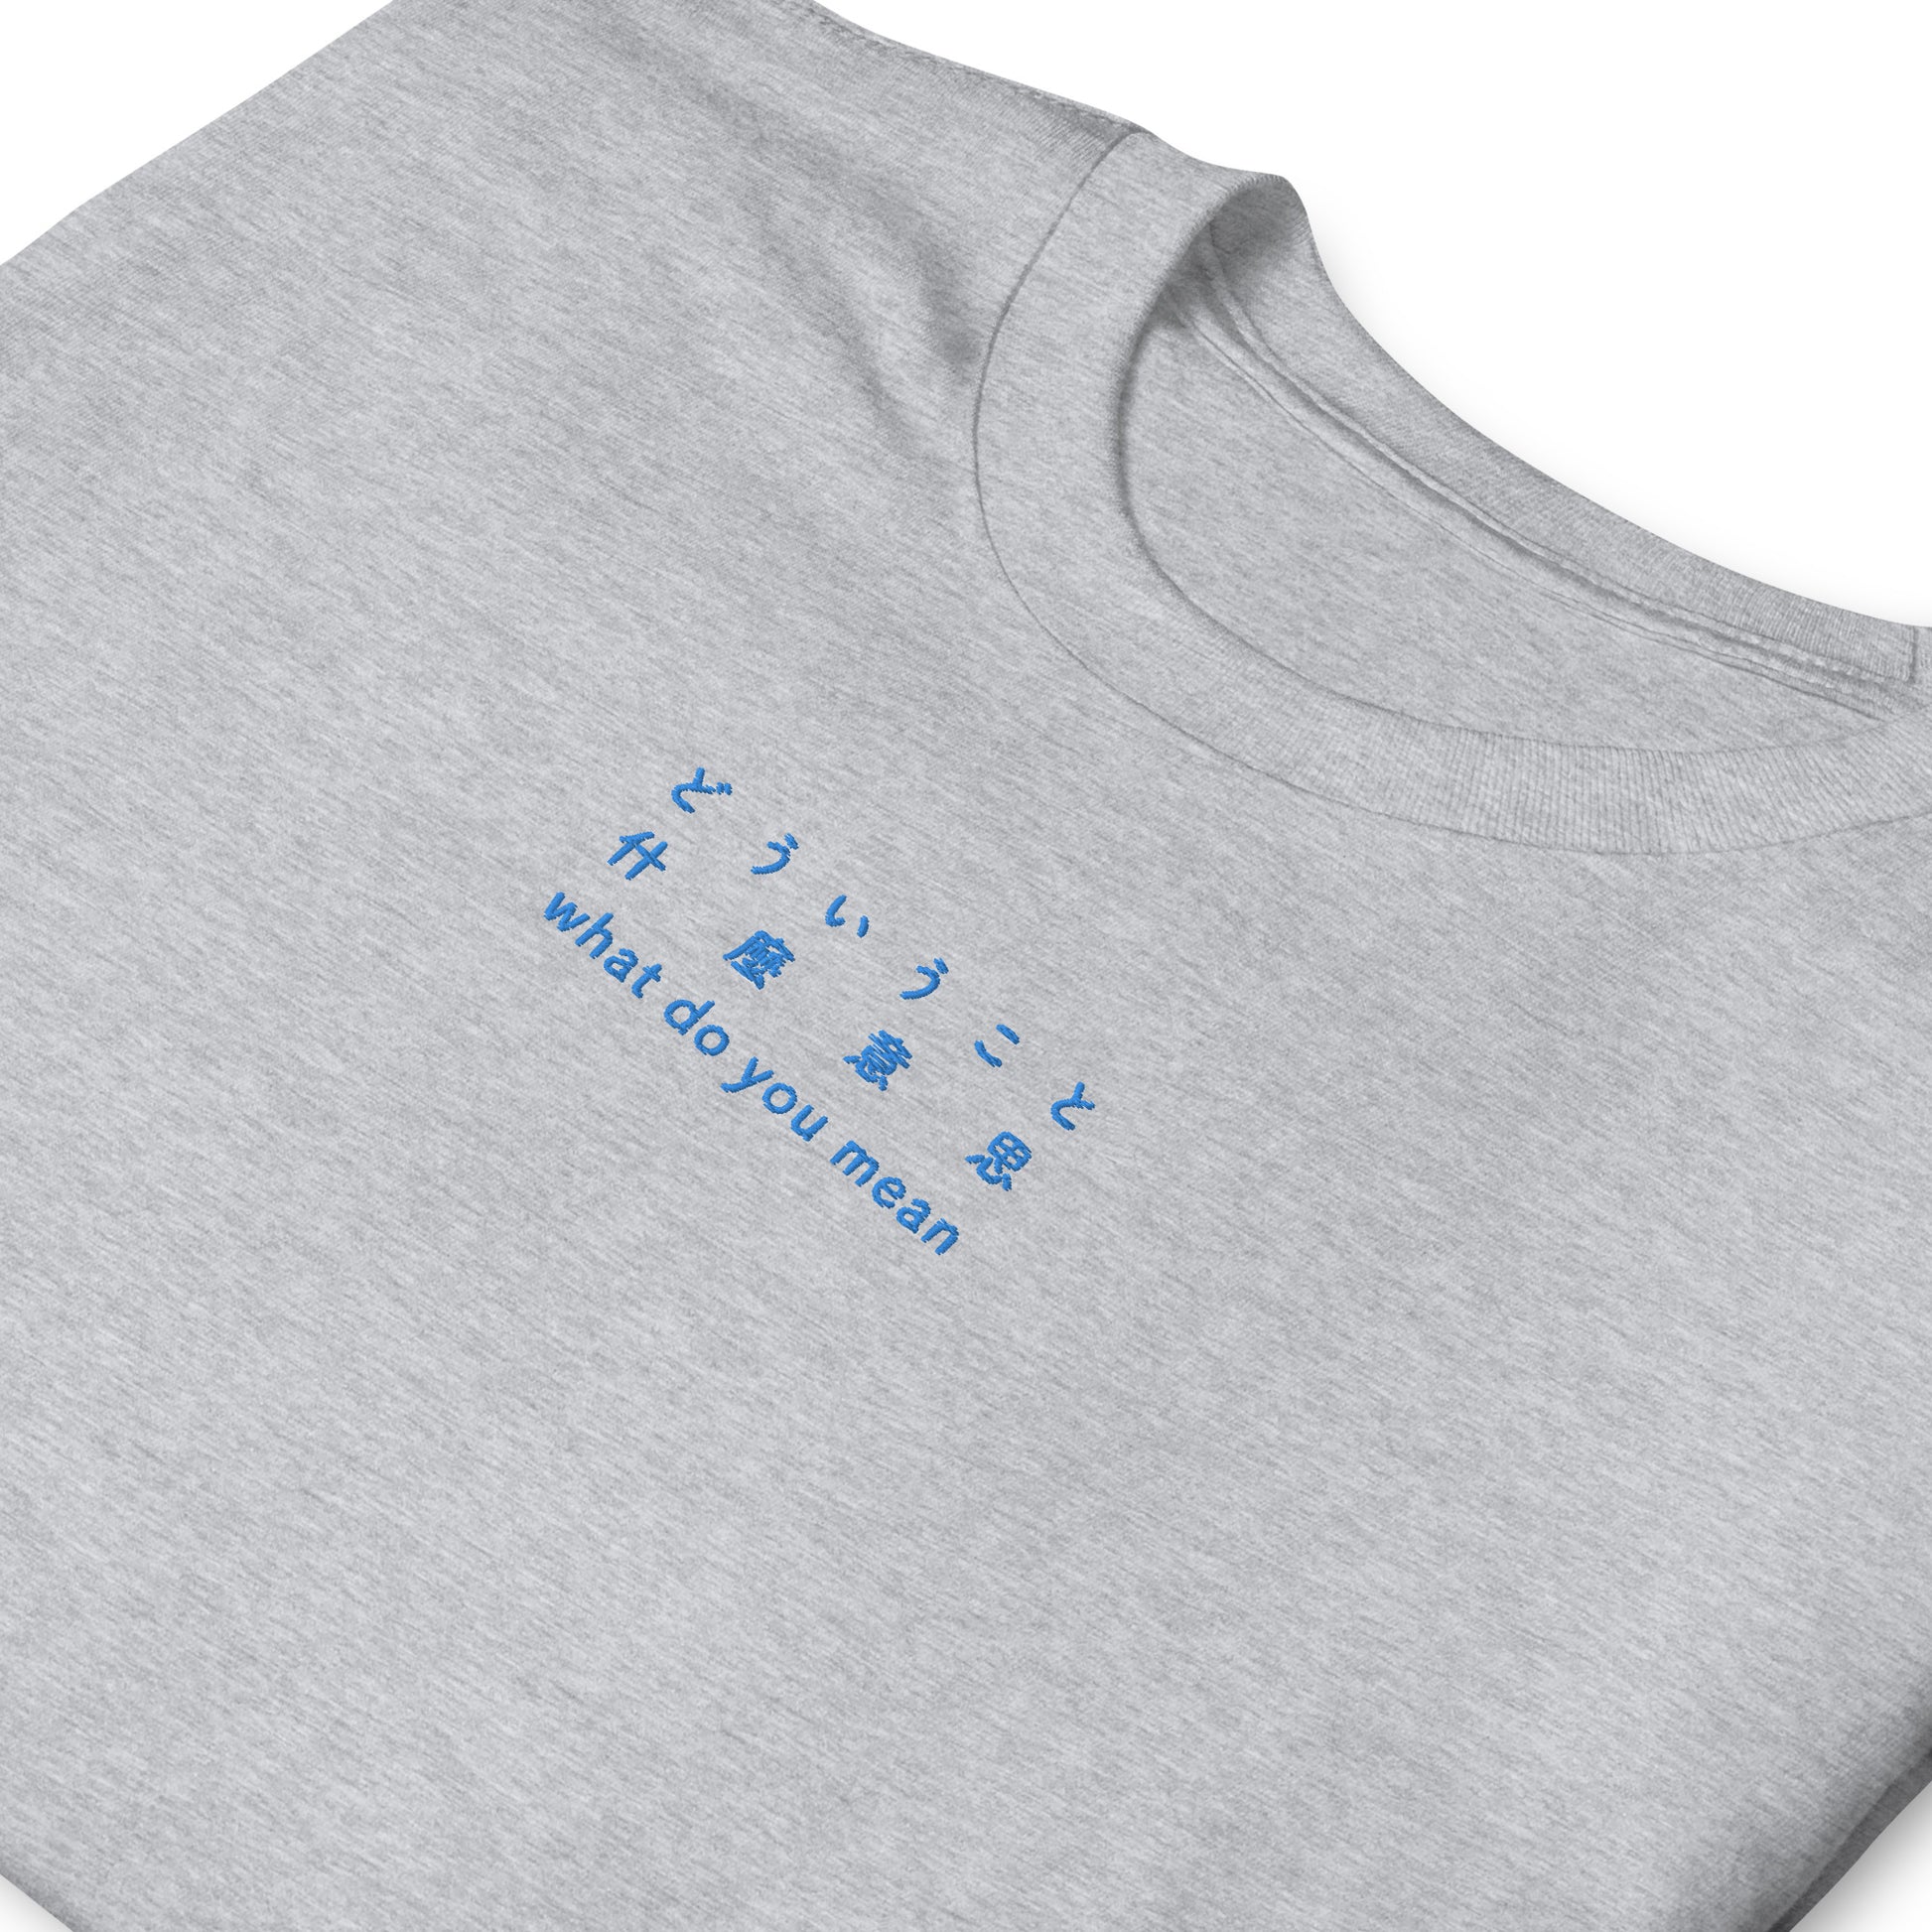 Light Gray High Quality Tee - Front Design with an Blue Embroidery "What Do You Mean" in Japanese, Chinese and English